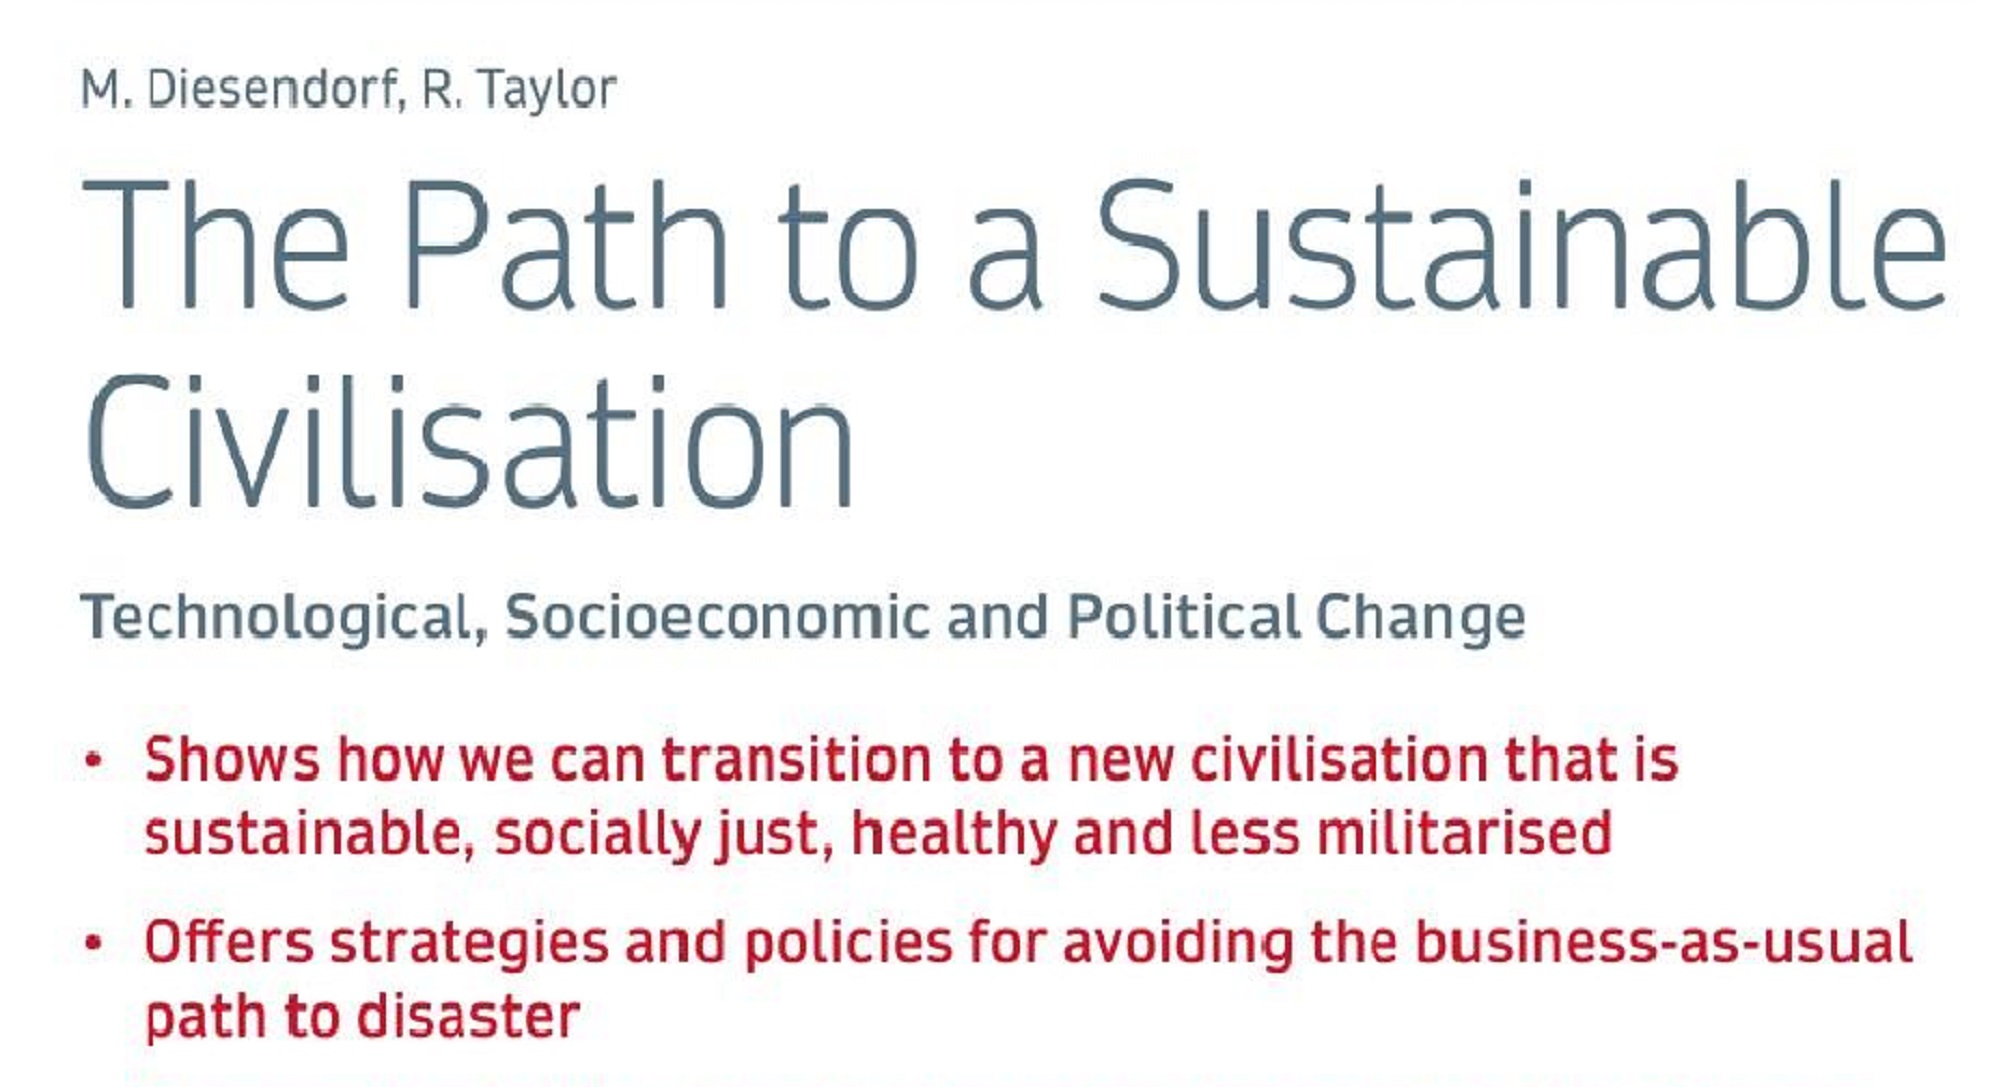 The Path to a Sustainable Civilization